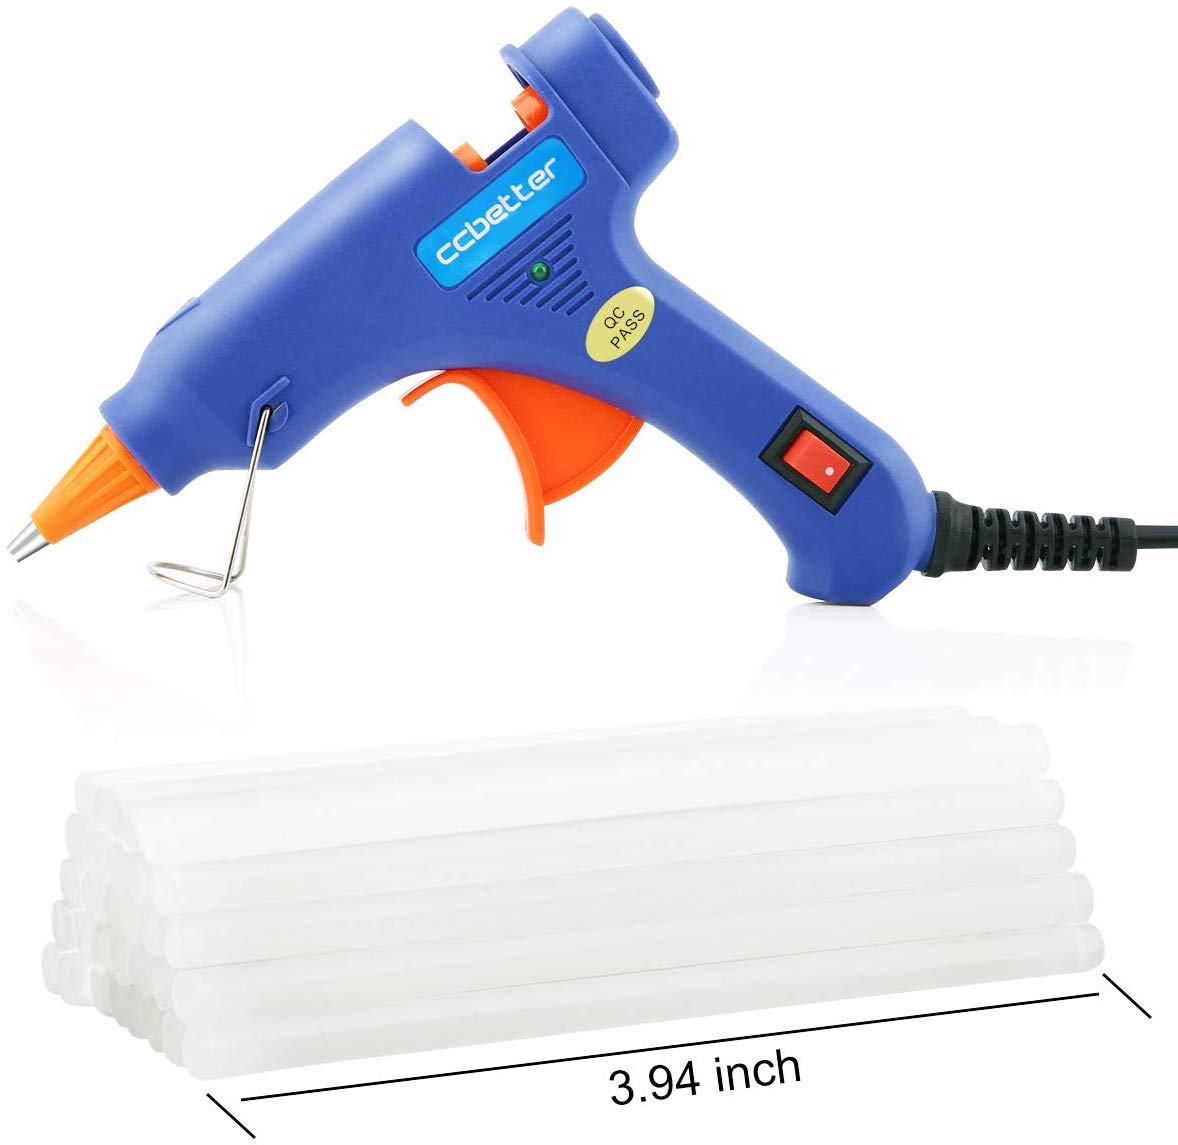 ccbetter Upgraded Mini Hot Melt Glue Gun with 30pcs Glue Sticks,Removable Anti-hot Cover Glue Gun Kit with Flexible Trigger for DIY Small Craft Projects & Sealing and Quick Daily Repairs 20-watt,Blue